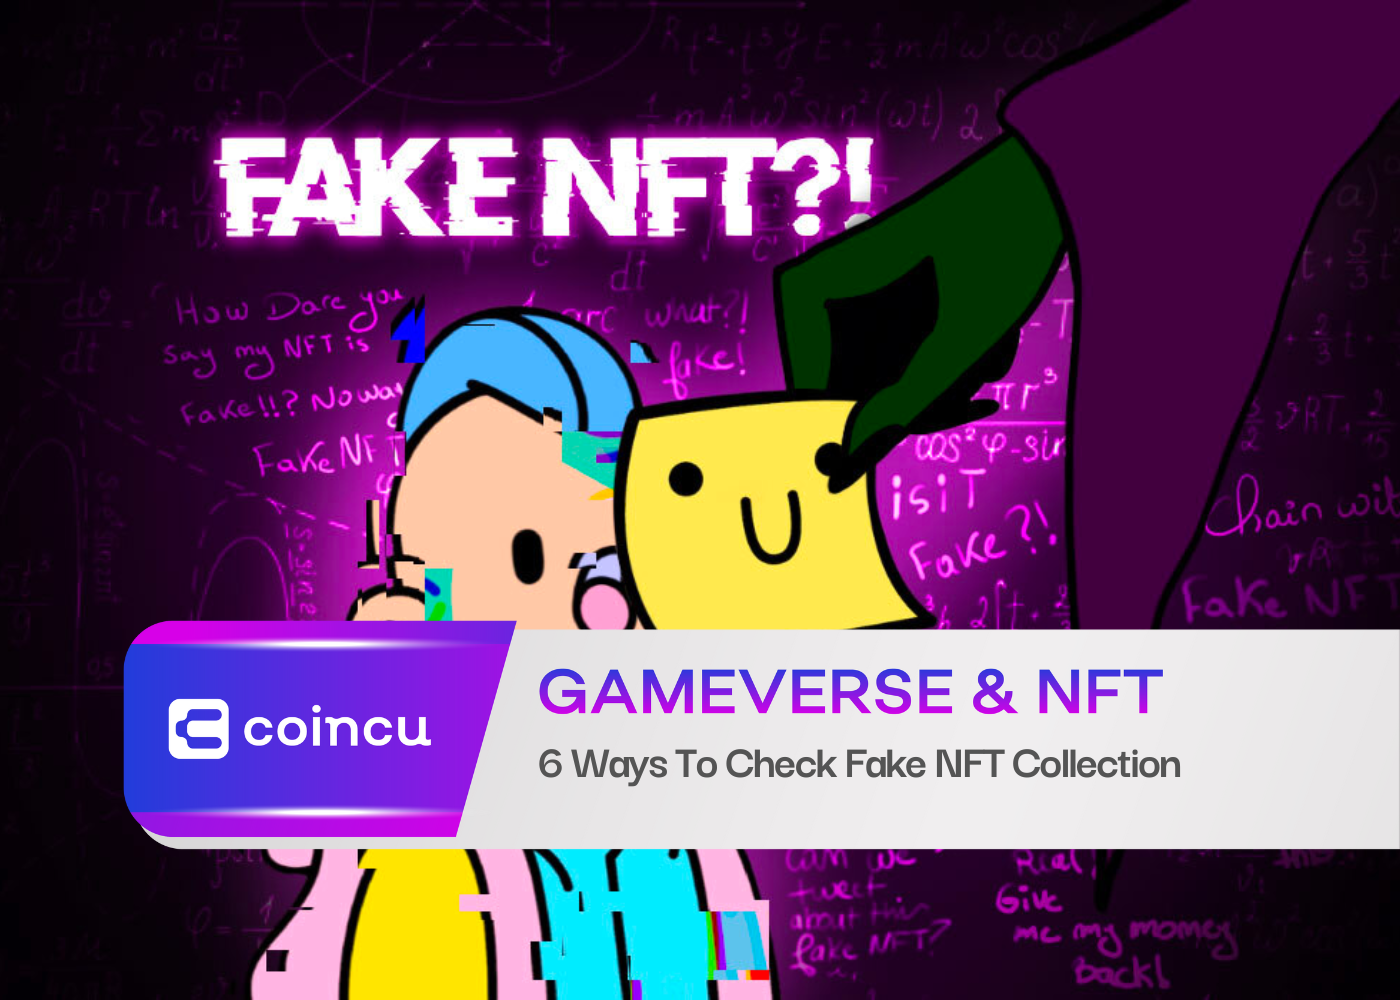 6 Ways To Check Fake NFT Collection